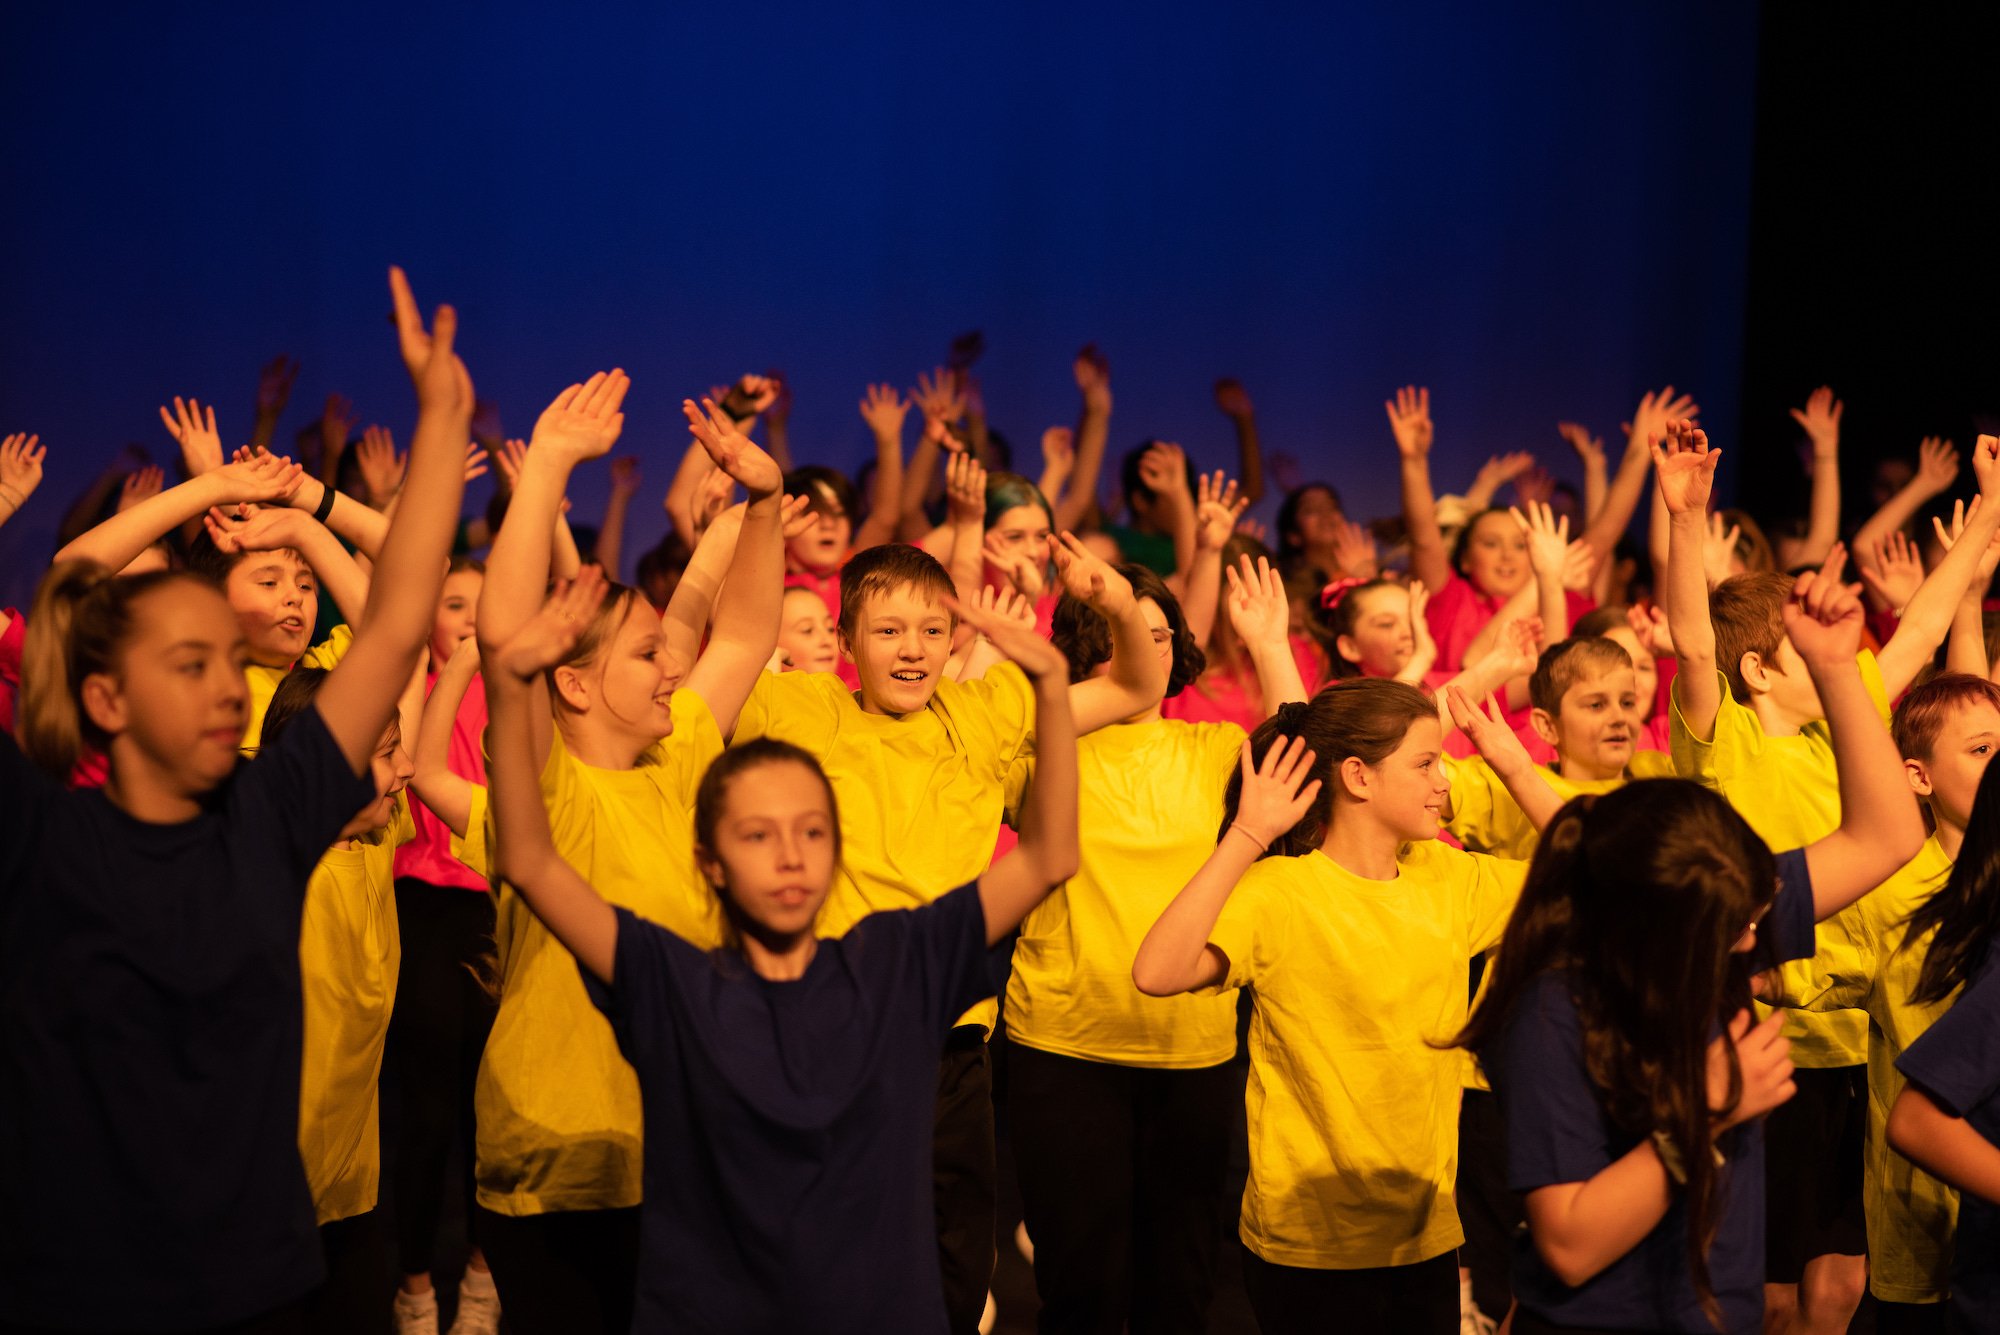  dozens of students dancing on stage joyfully arms raised 